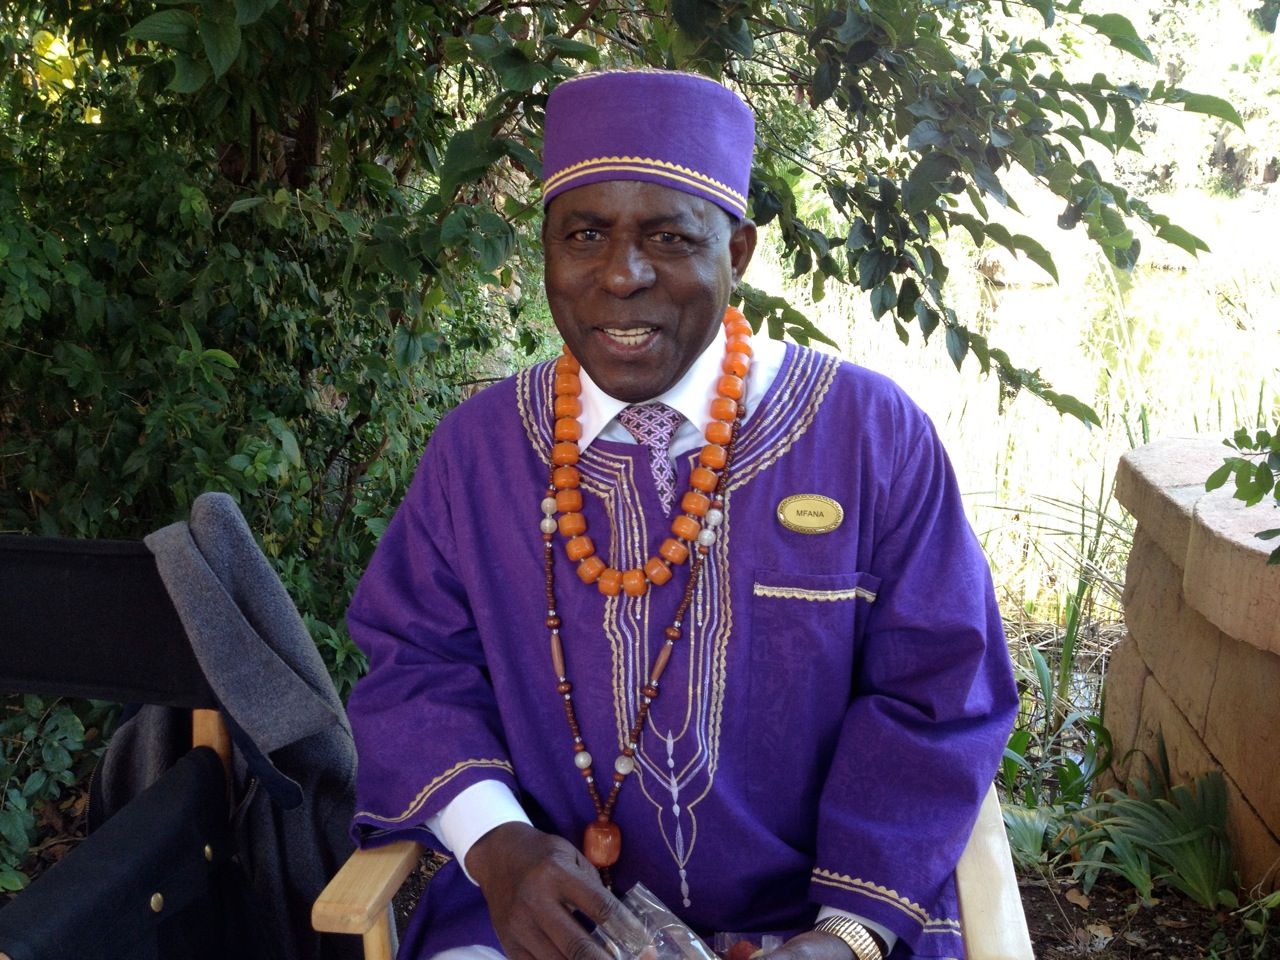 Abdoulaye N'Gom on the set of Blended